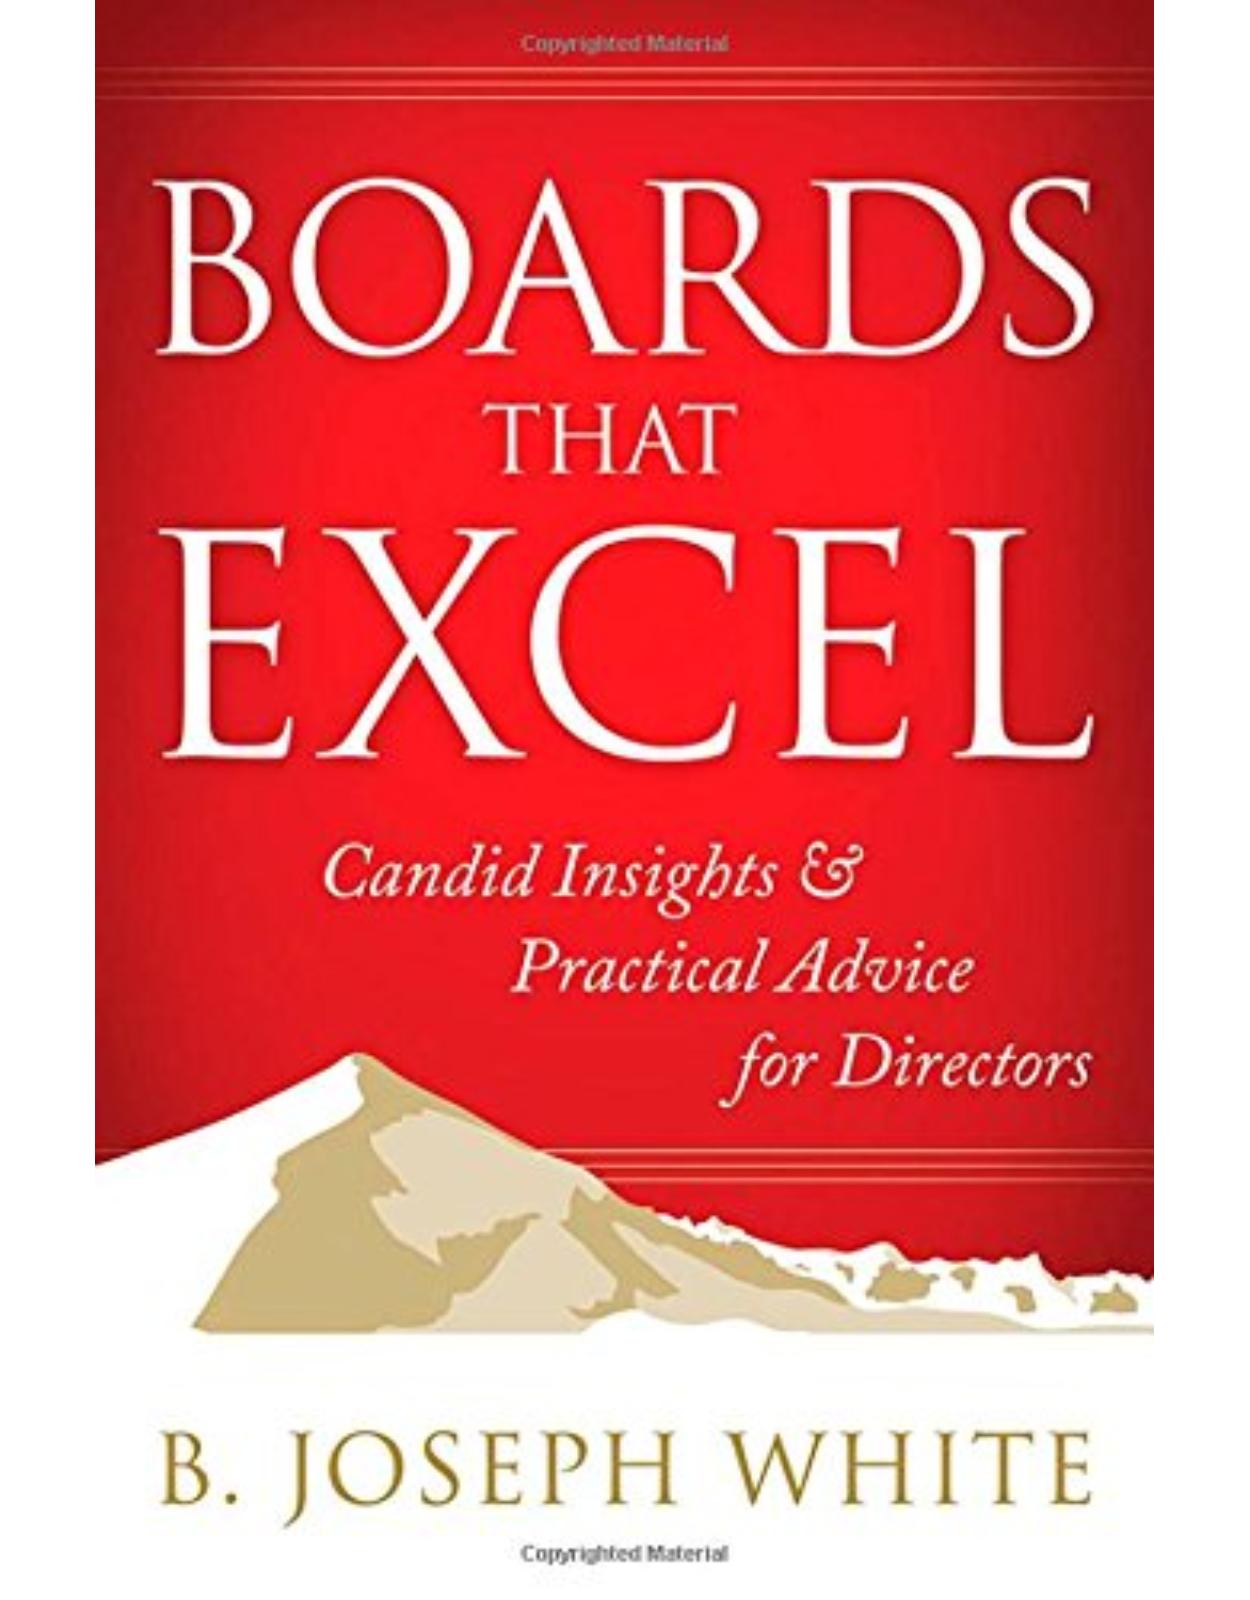 Boards That Excel: Candid Insights and Practical Advice for Directors (BK Business)